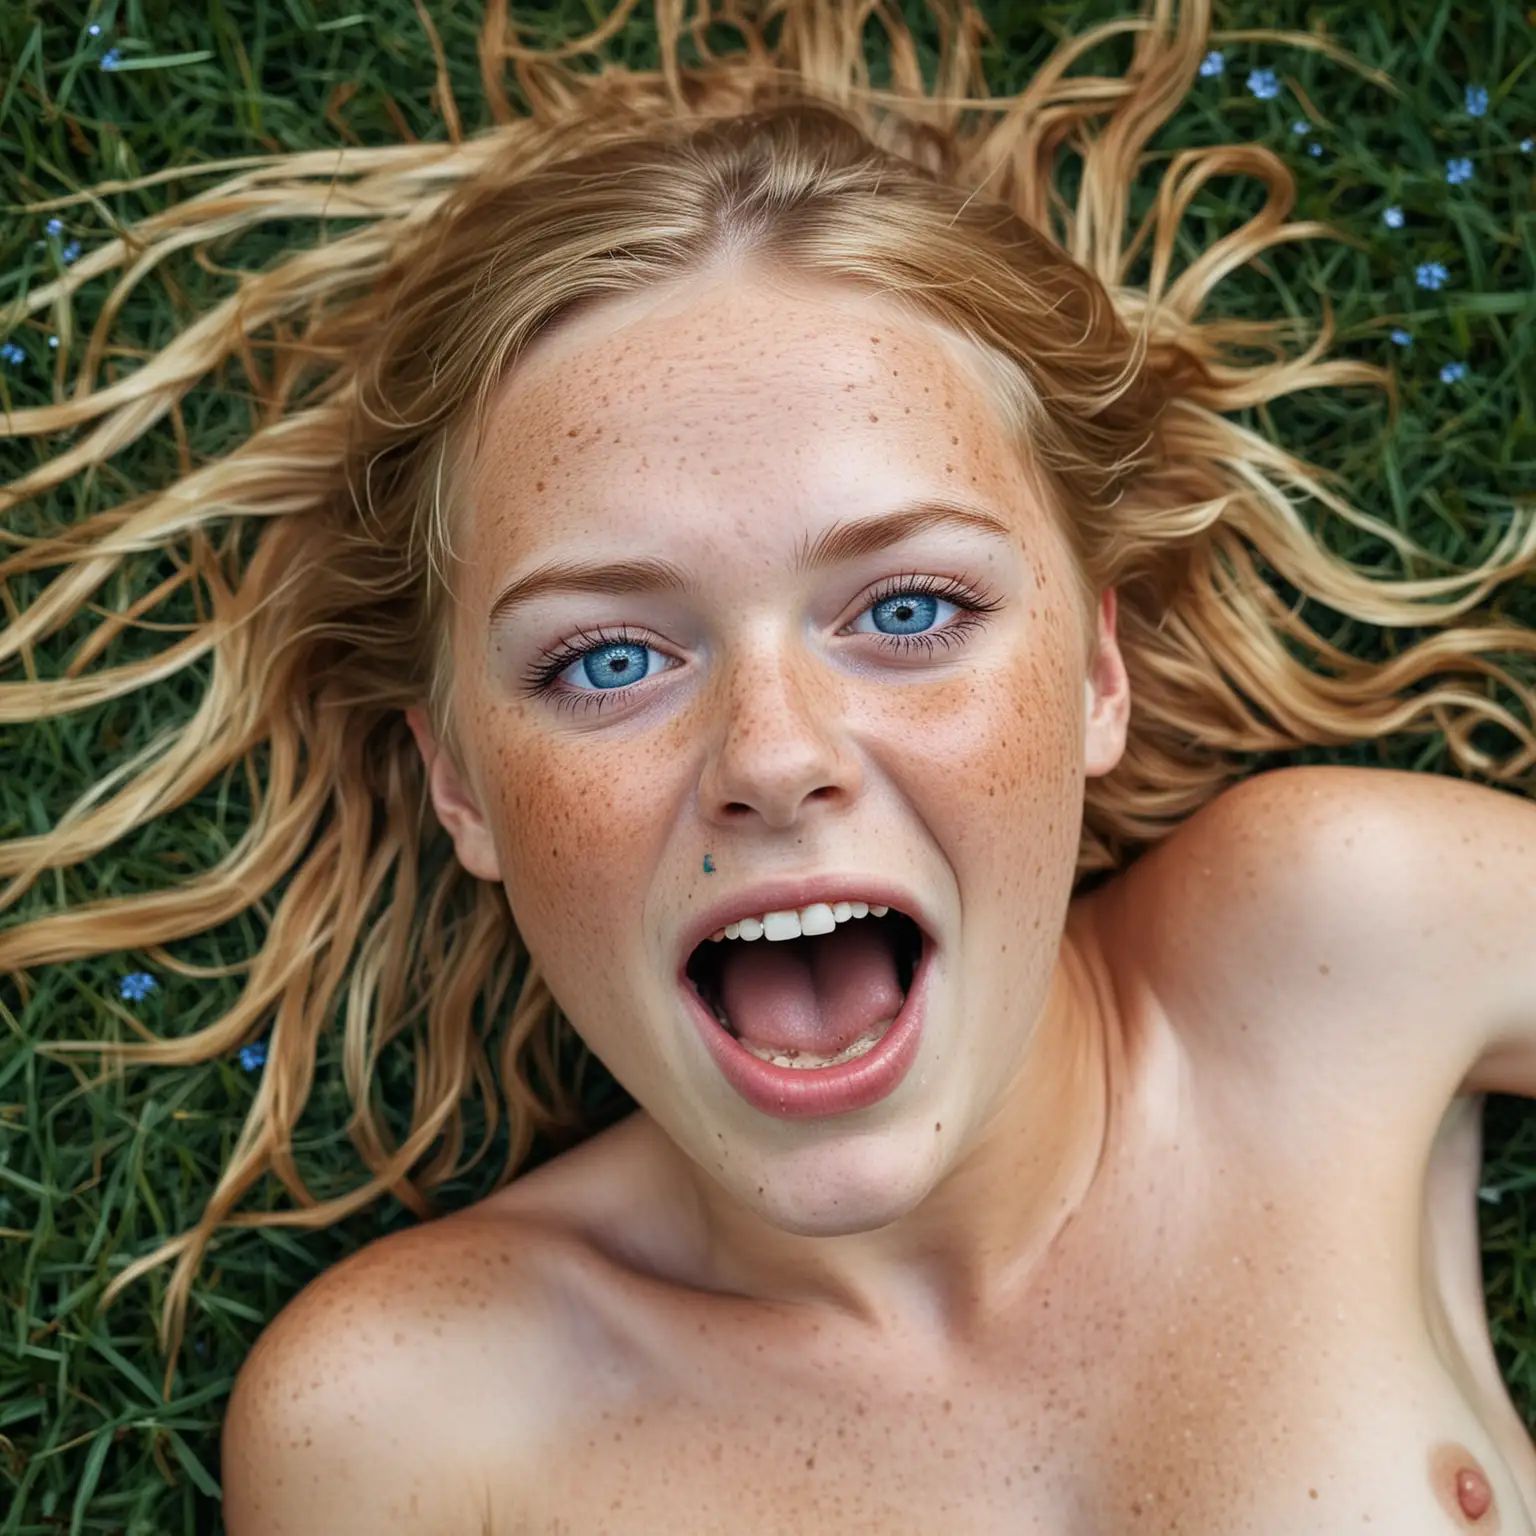 naked freckle face blonde blue-eyed girl laying on back in grass look of terror on her face mouth open